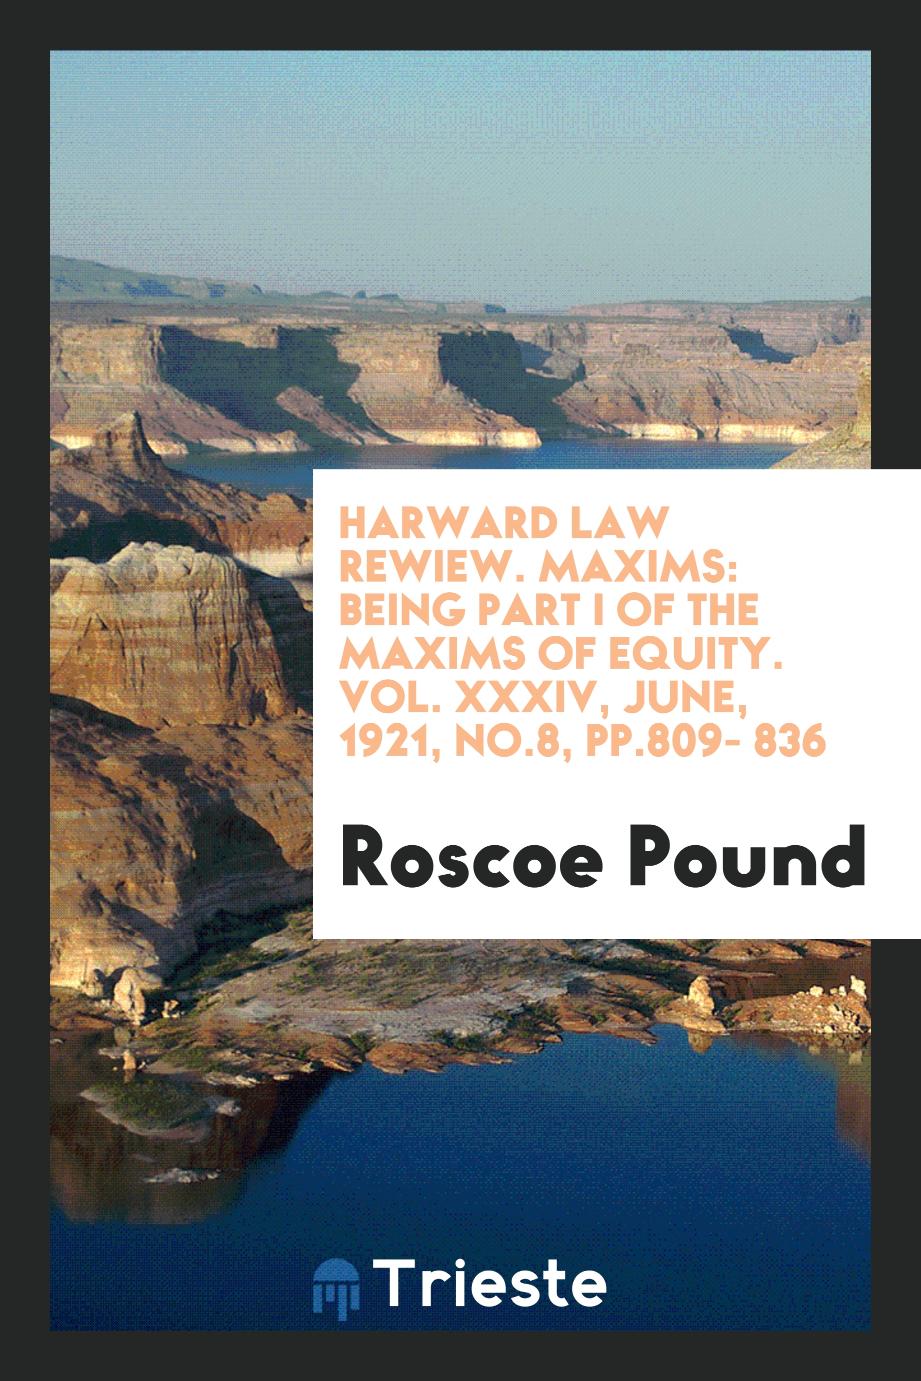 Harward Law Rewiew. Maxims: being part I of the maxims of equity. Vol. XXXIV, June, 1921, No.8, pp.809- 836